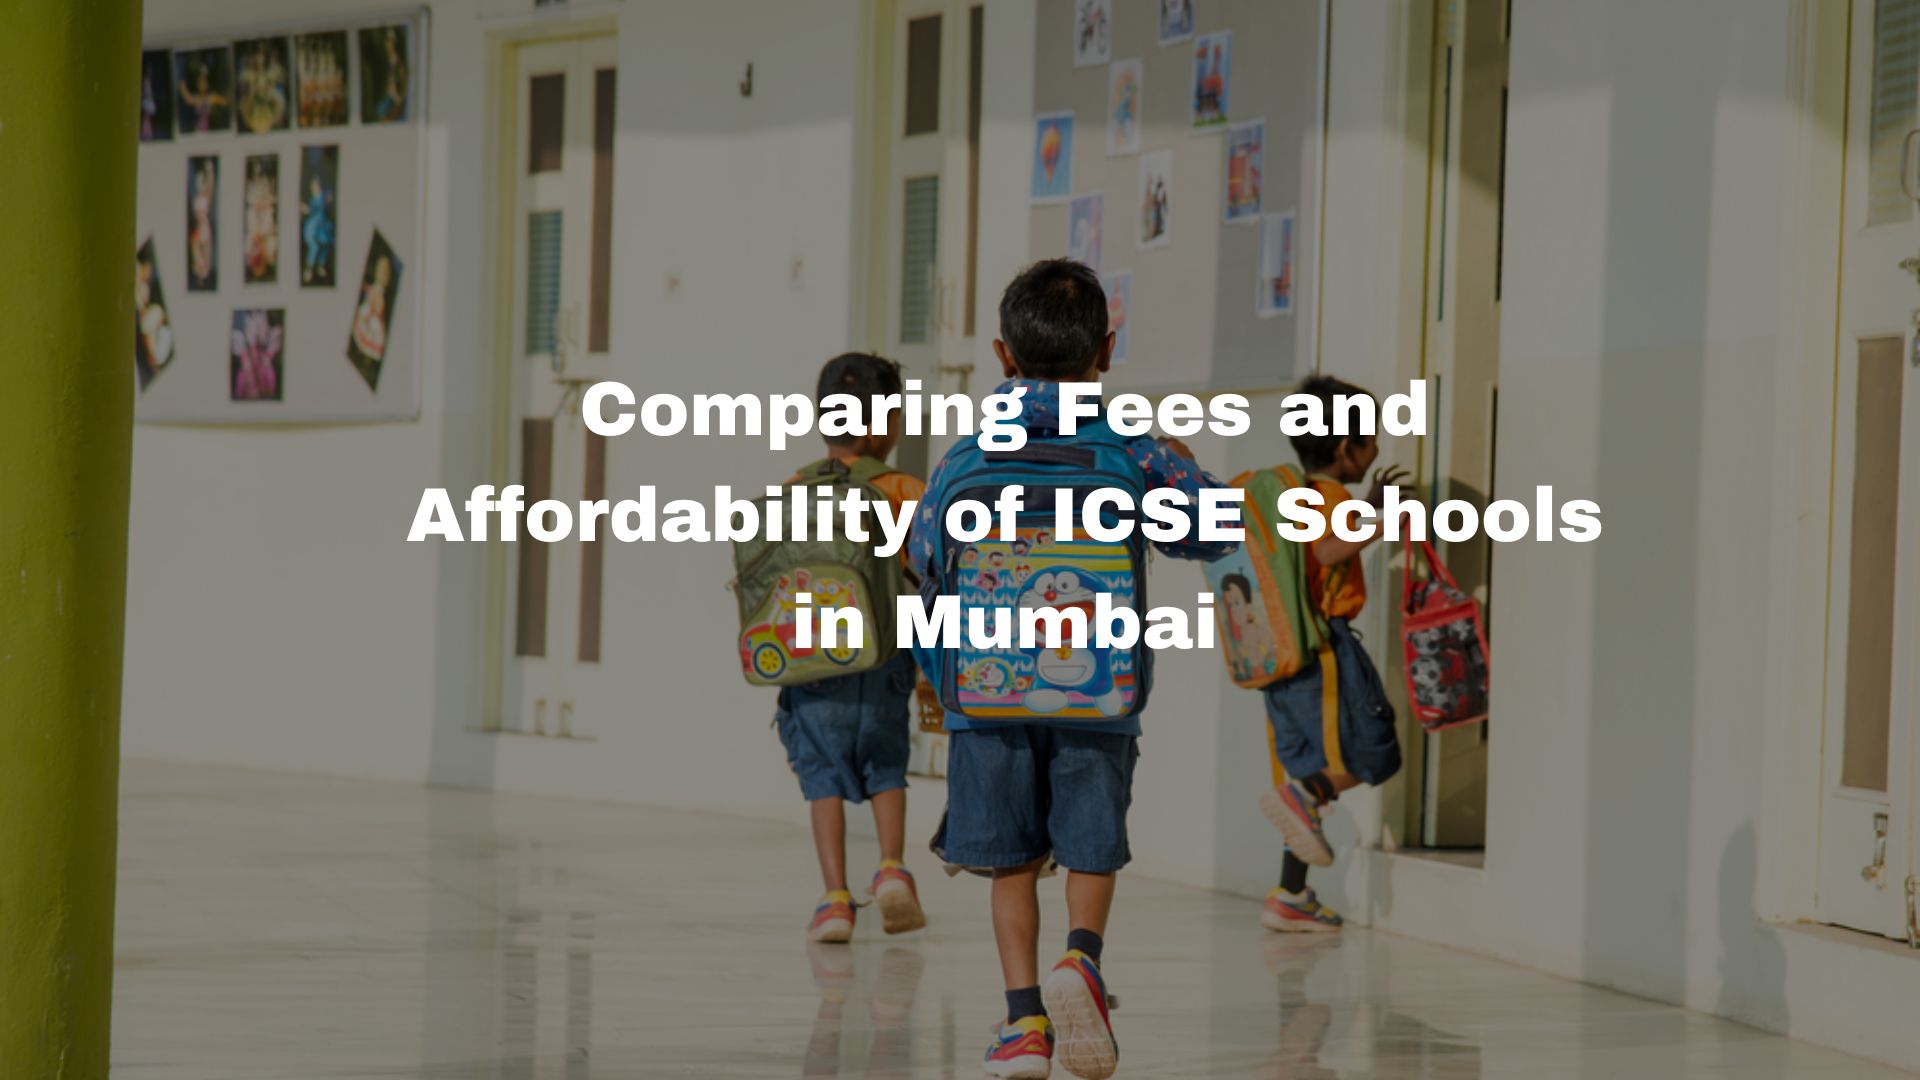 Comparing Fees and Affordability of ICSE Schools in Mumbai